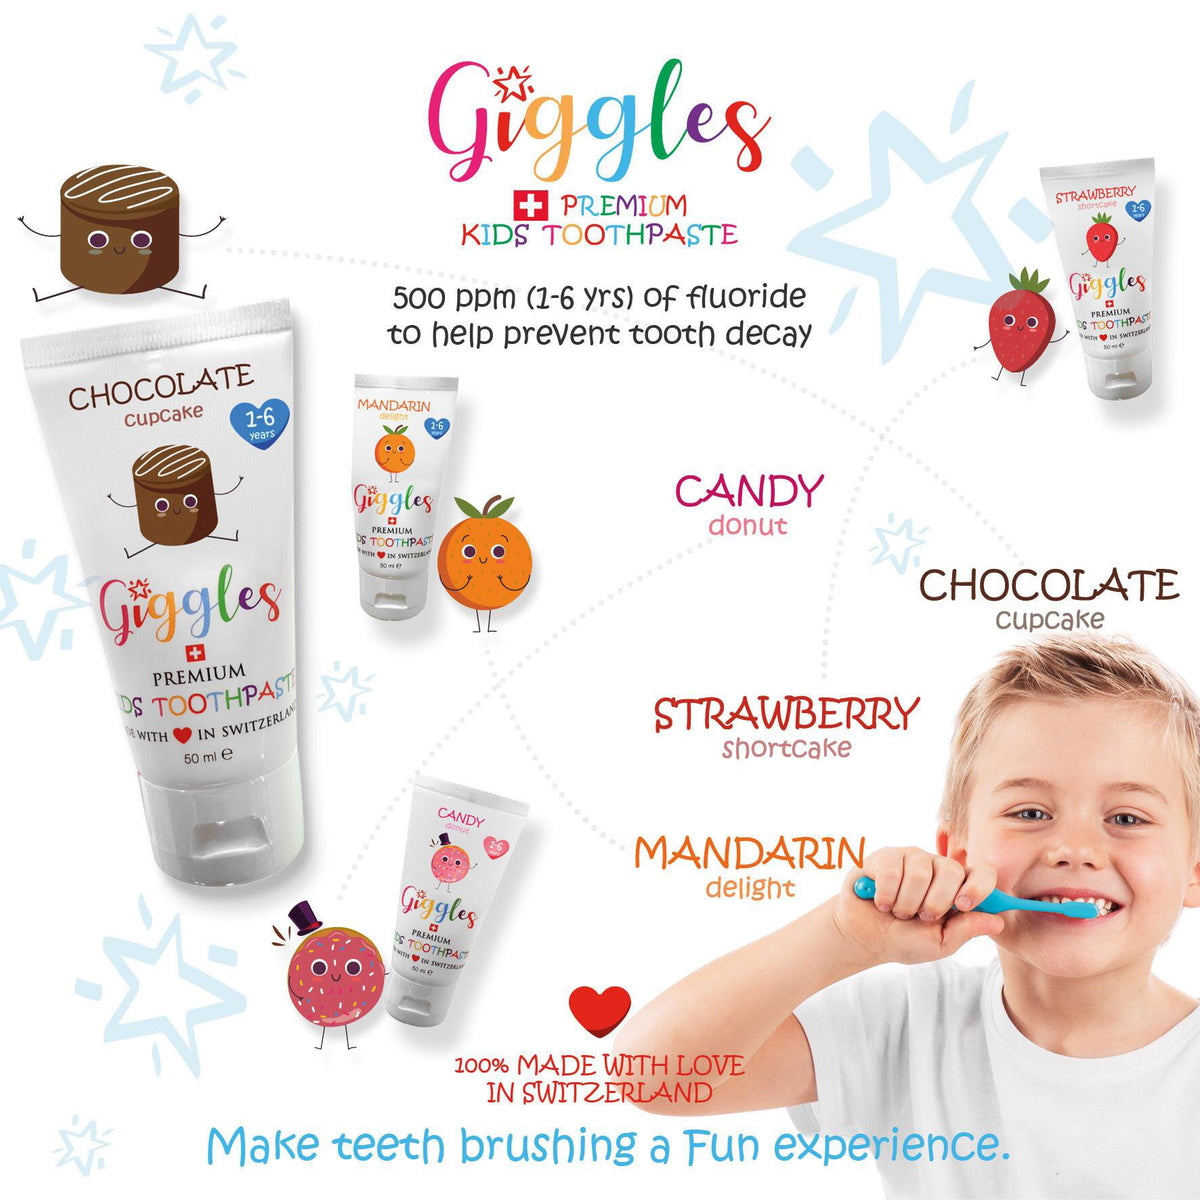 giggles-melon-delight-toothpaste- (6)